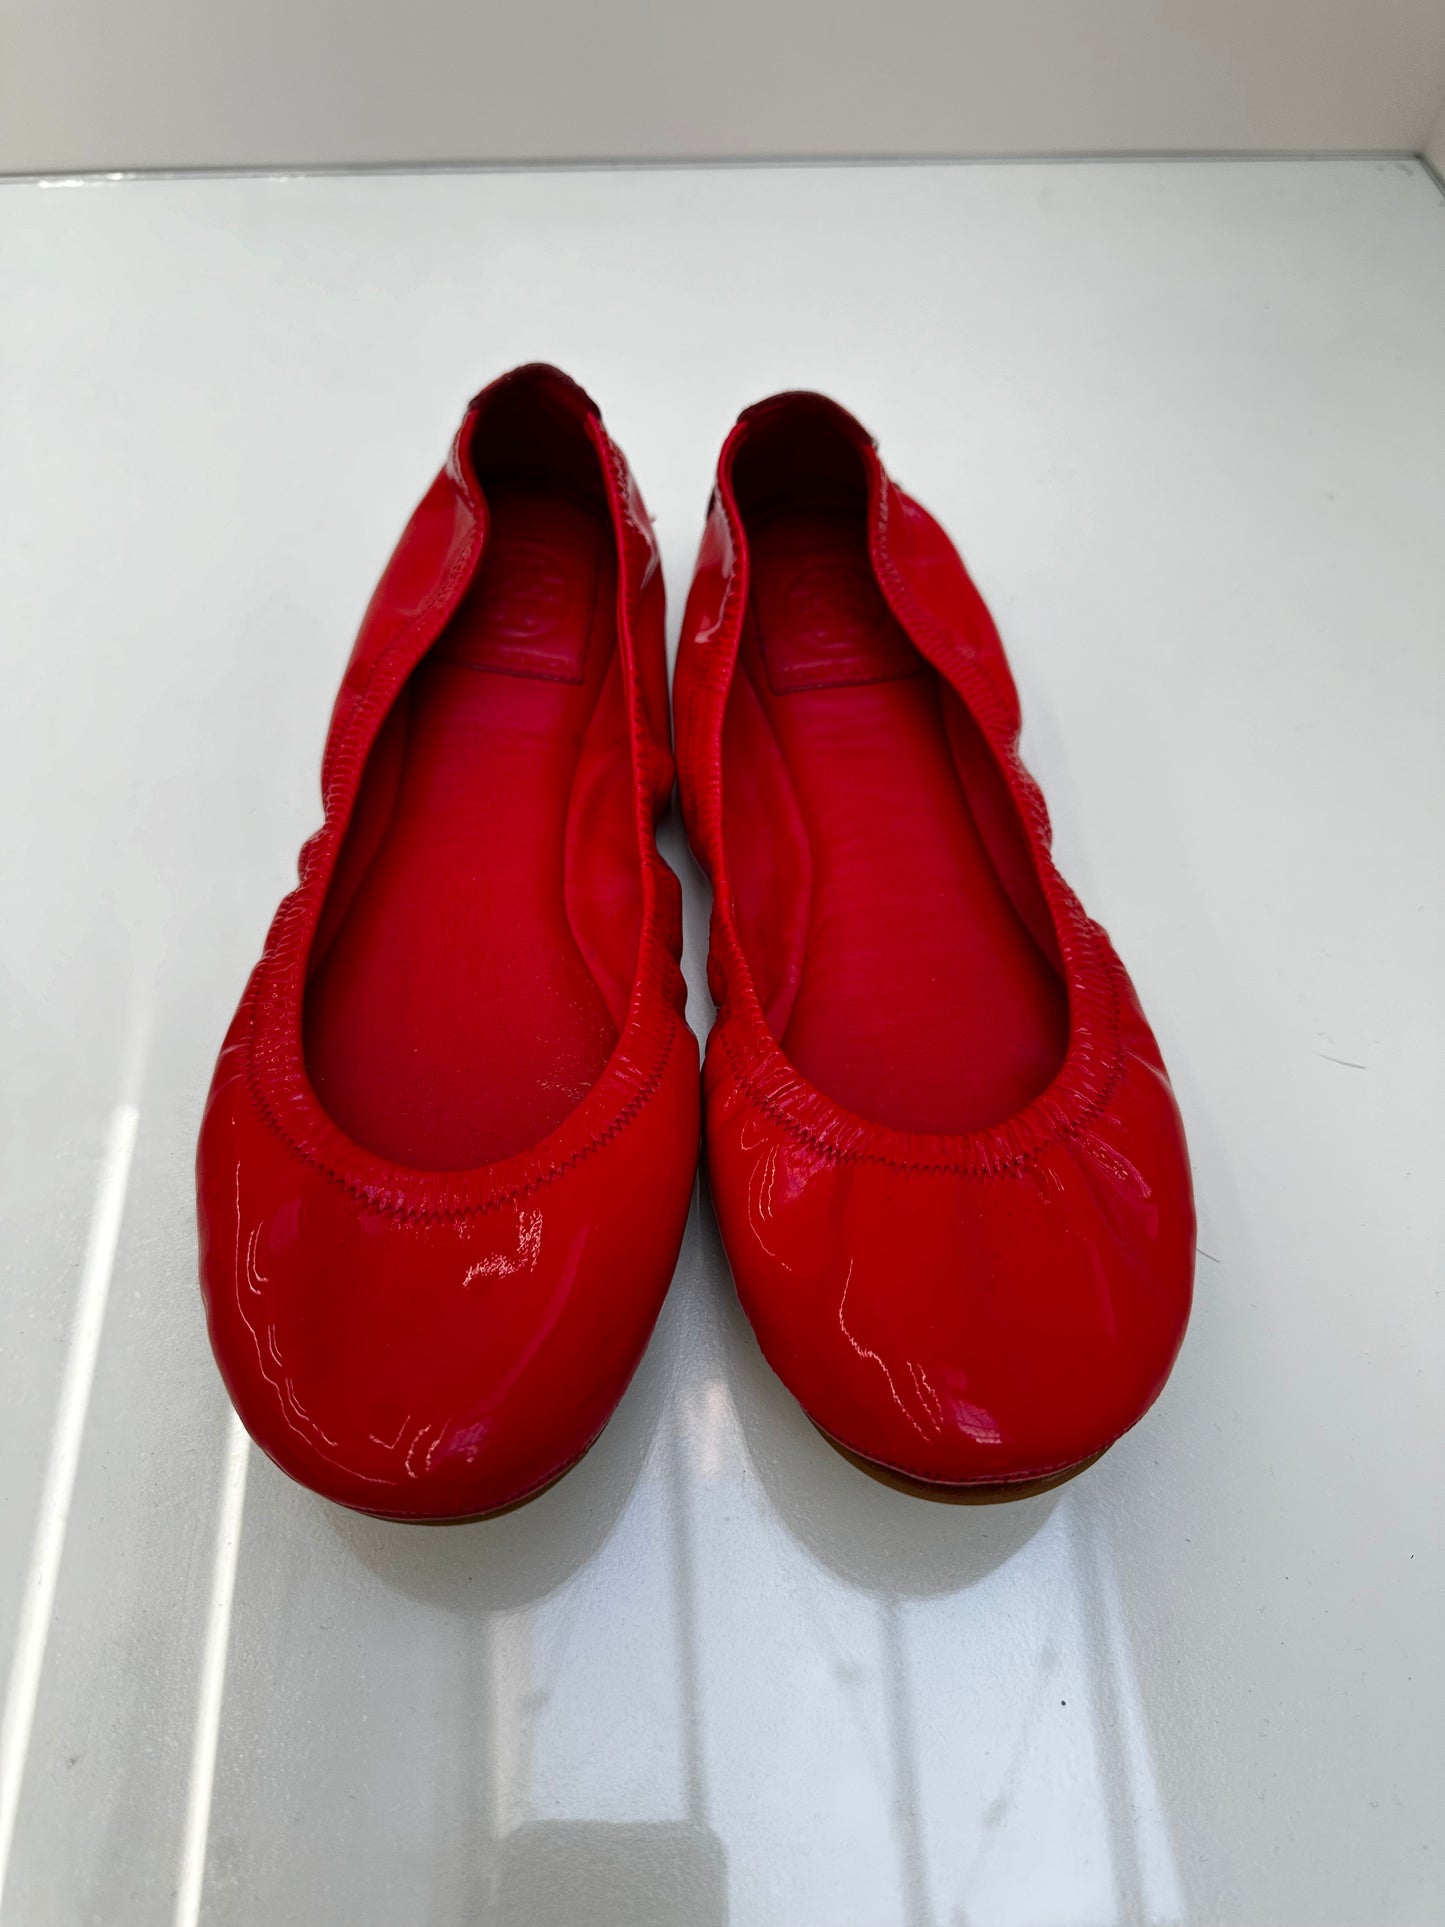 Tory Burch Red Patent Flats